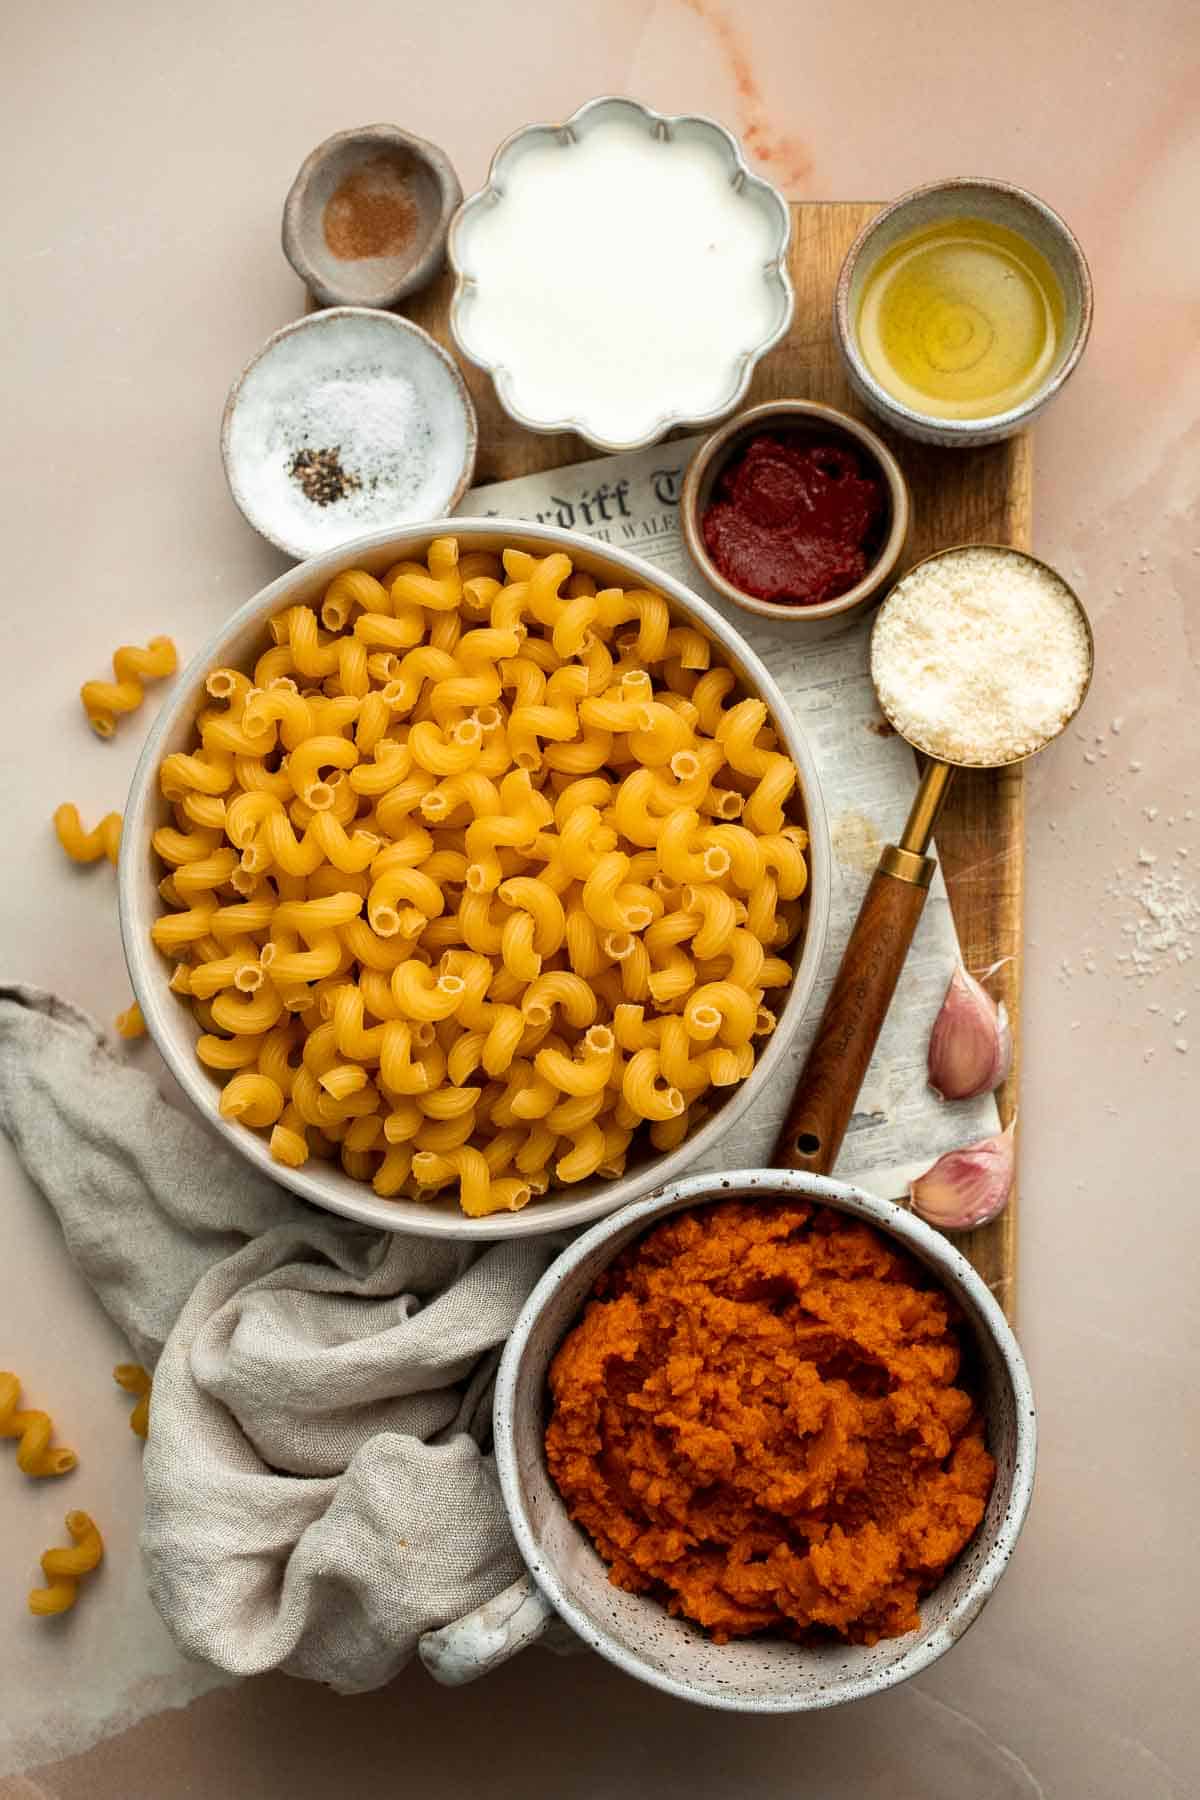 Pumpkin Pasta is one of the quickest and easiest pasta dishes you can make this fall! It's flavorful, creamy, cheesy, and made with real pumpkin! | aheadofthyme.com